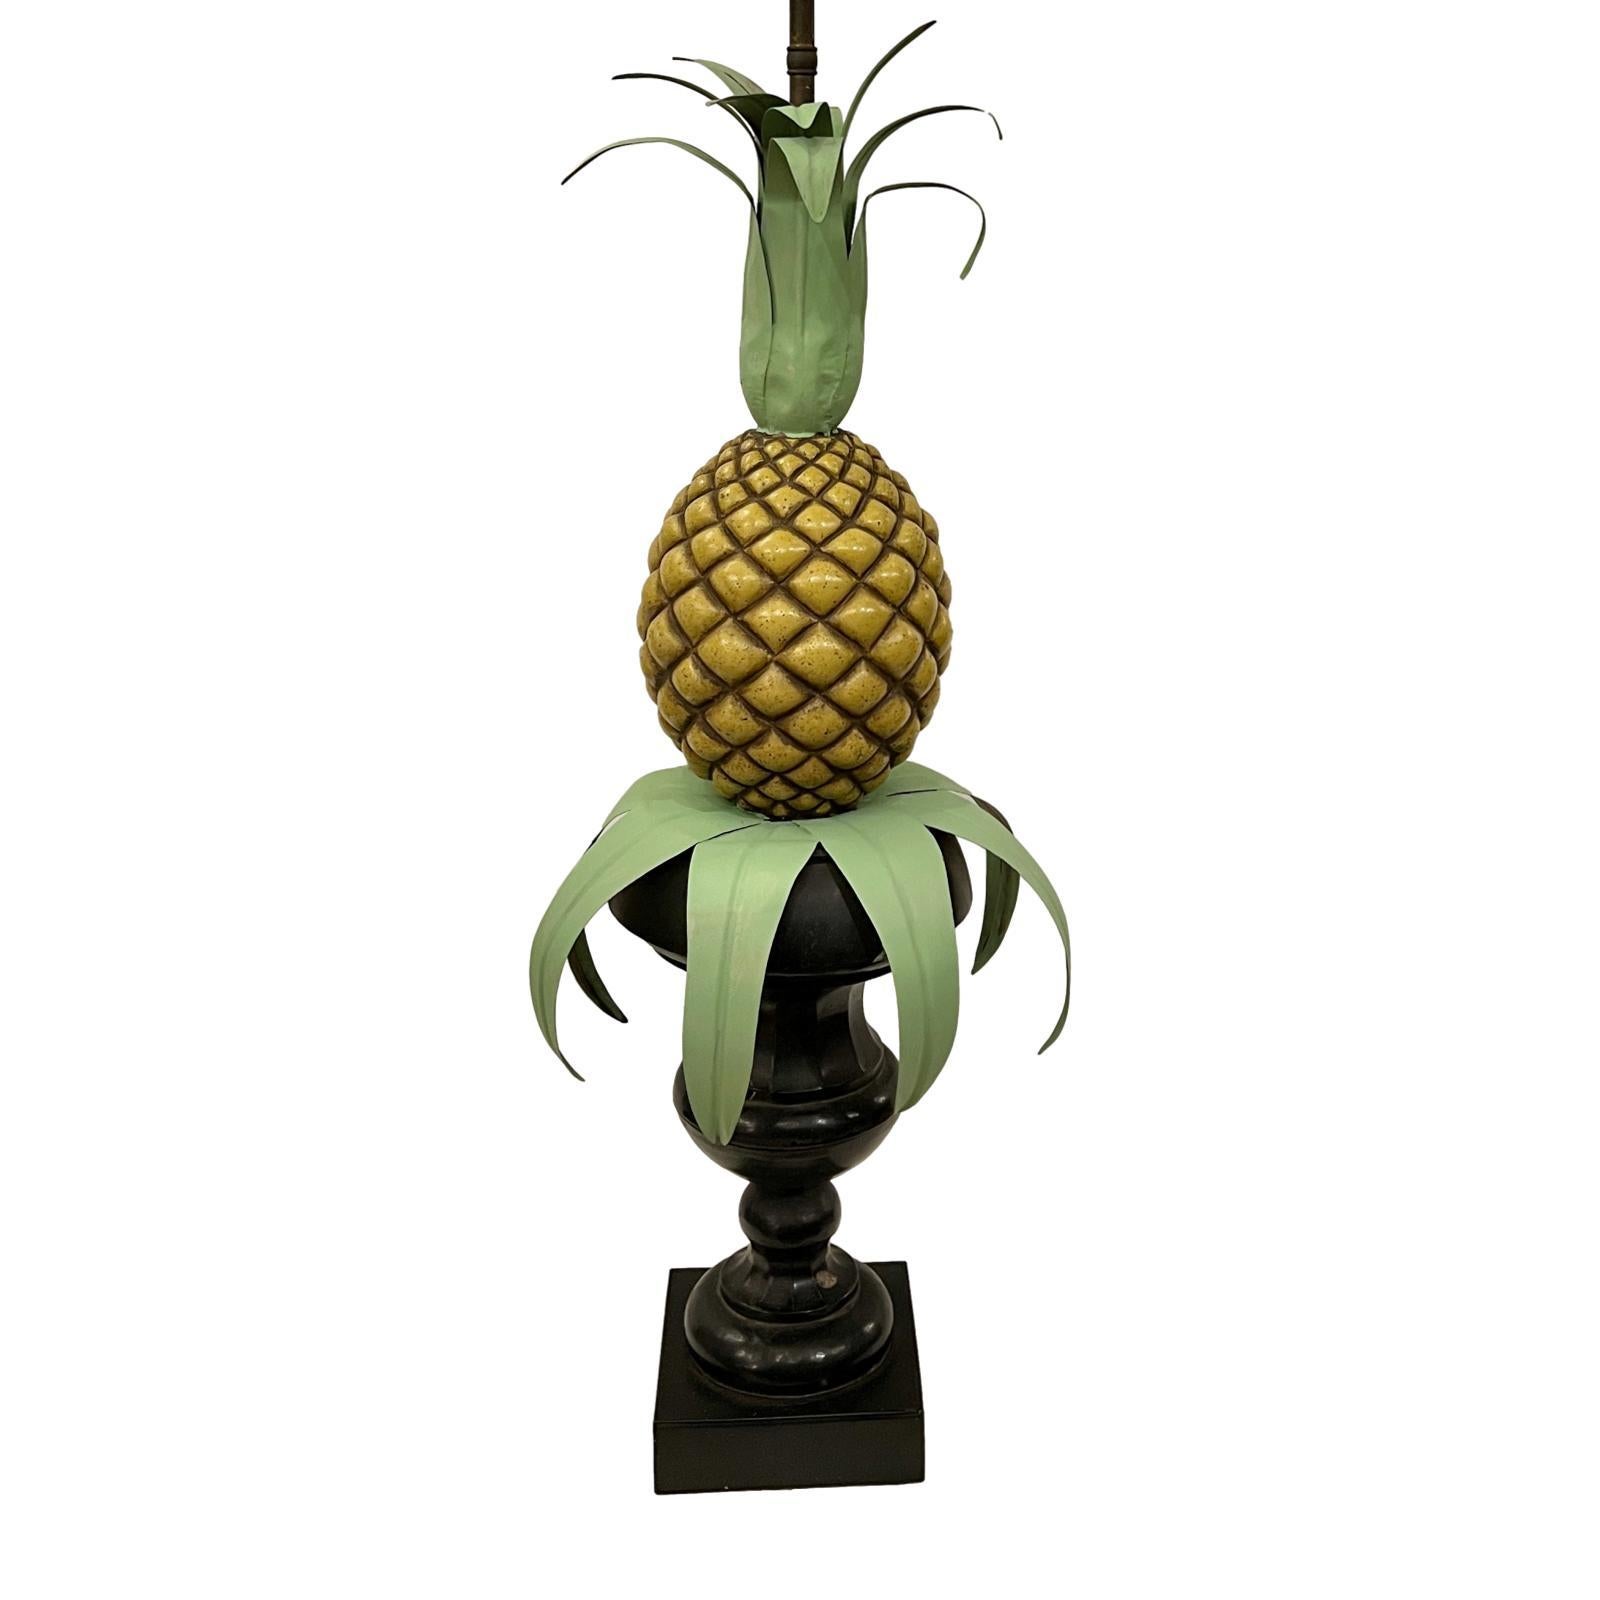 A circa 1940s Italian painted tole metal lamp in the shape of a pineapple.

Measurements:
Height of body: 29